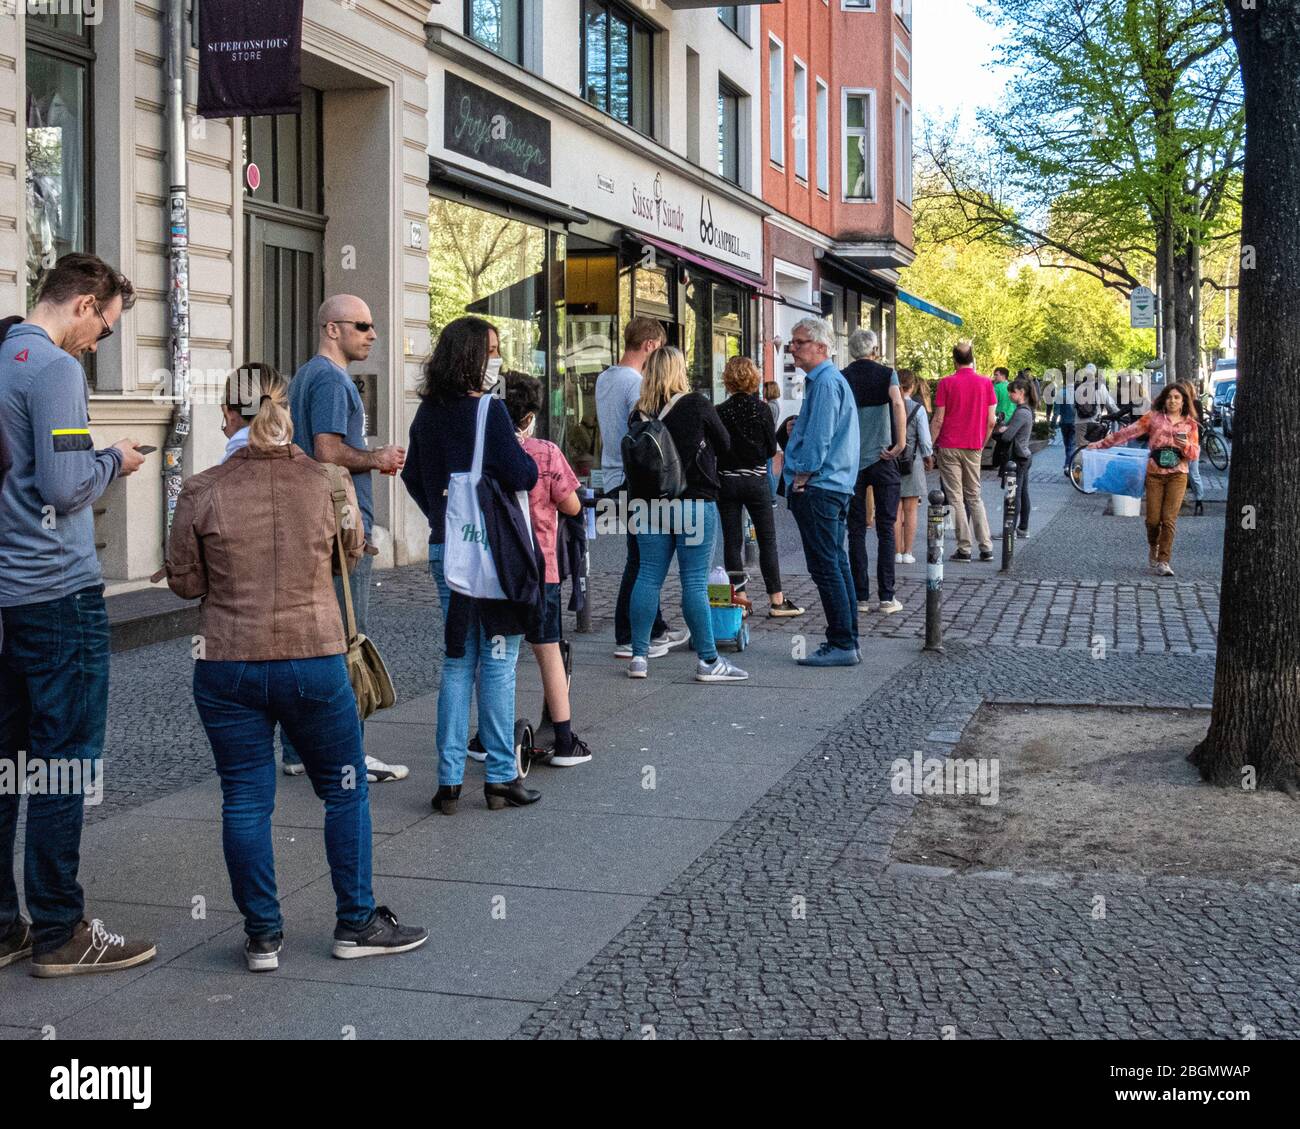 Berlin, Mitte, COVID-19 epidemic. People observe social distancing in queue outside  Süsse Sunde ice cream shop Stock Photo